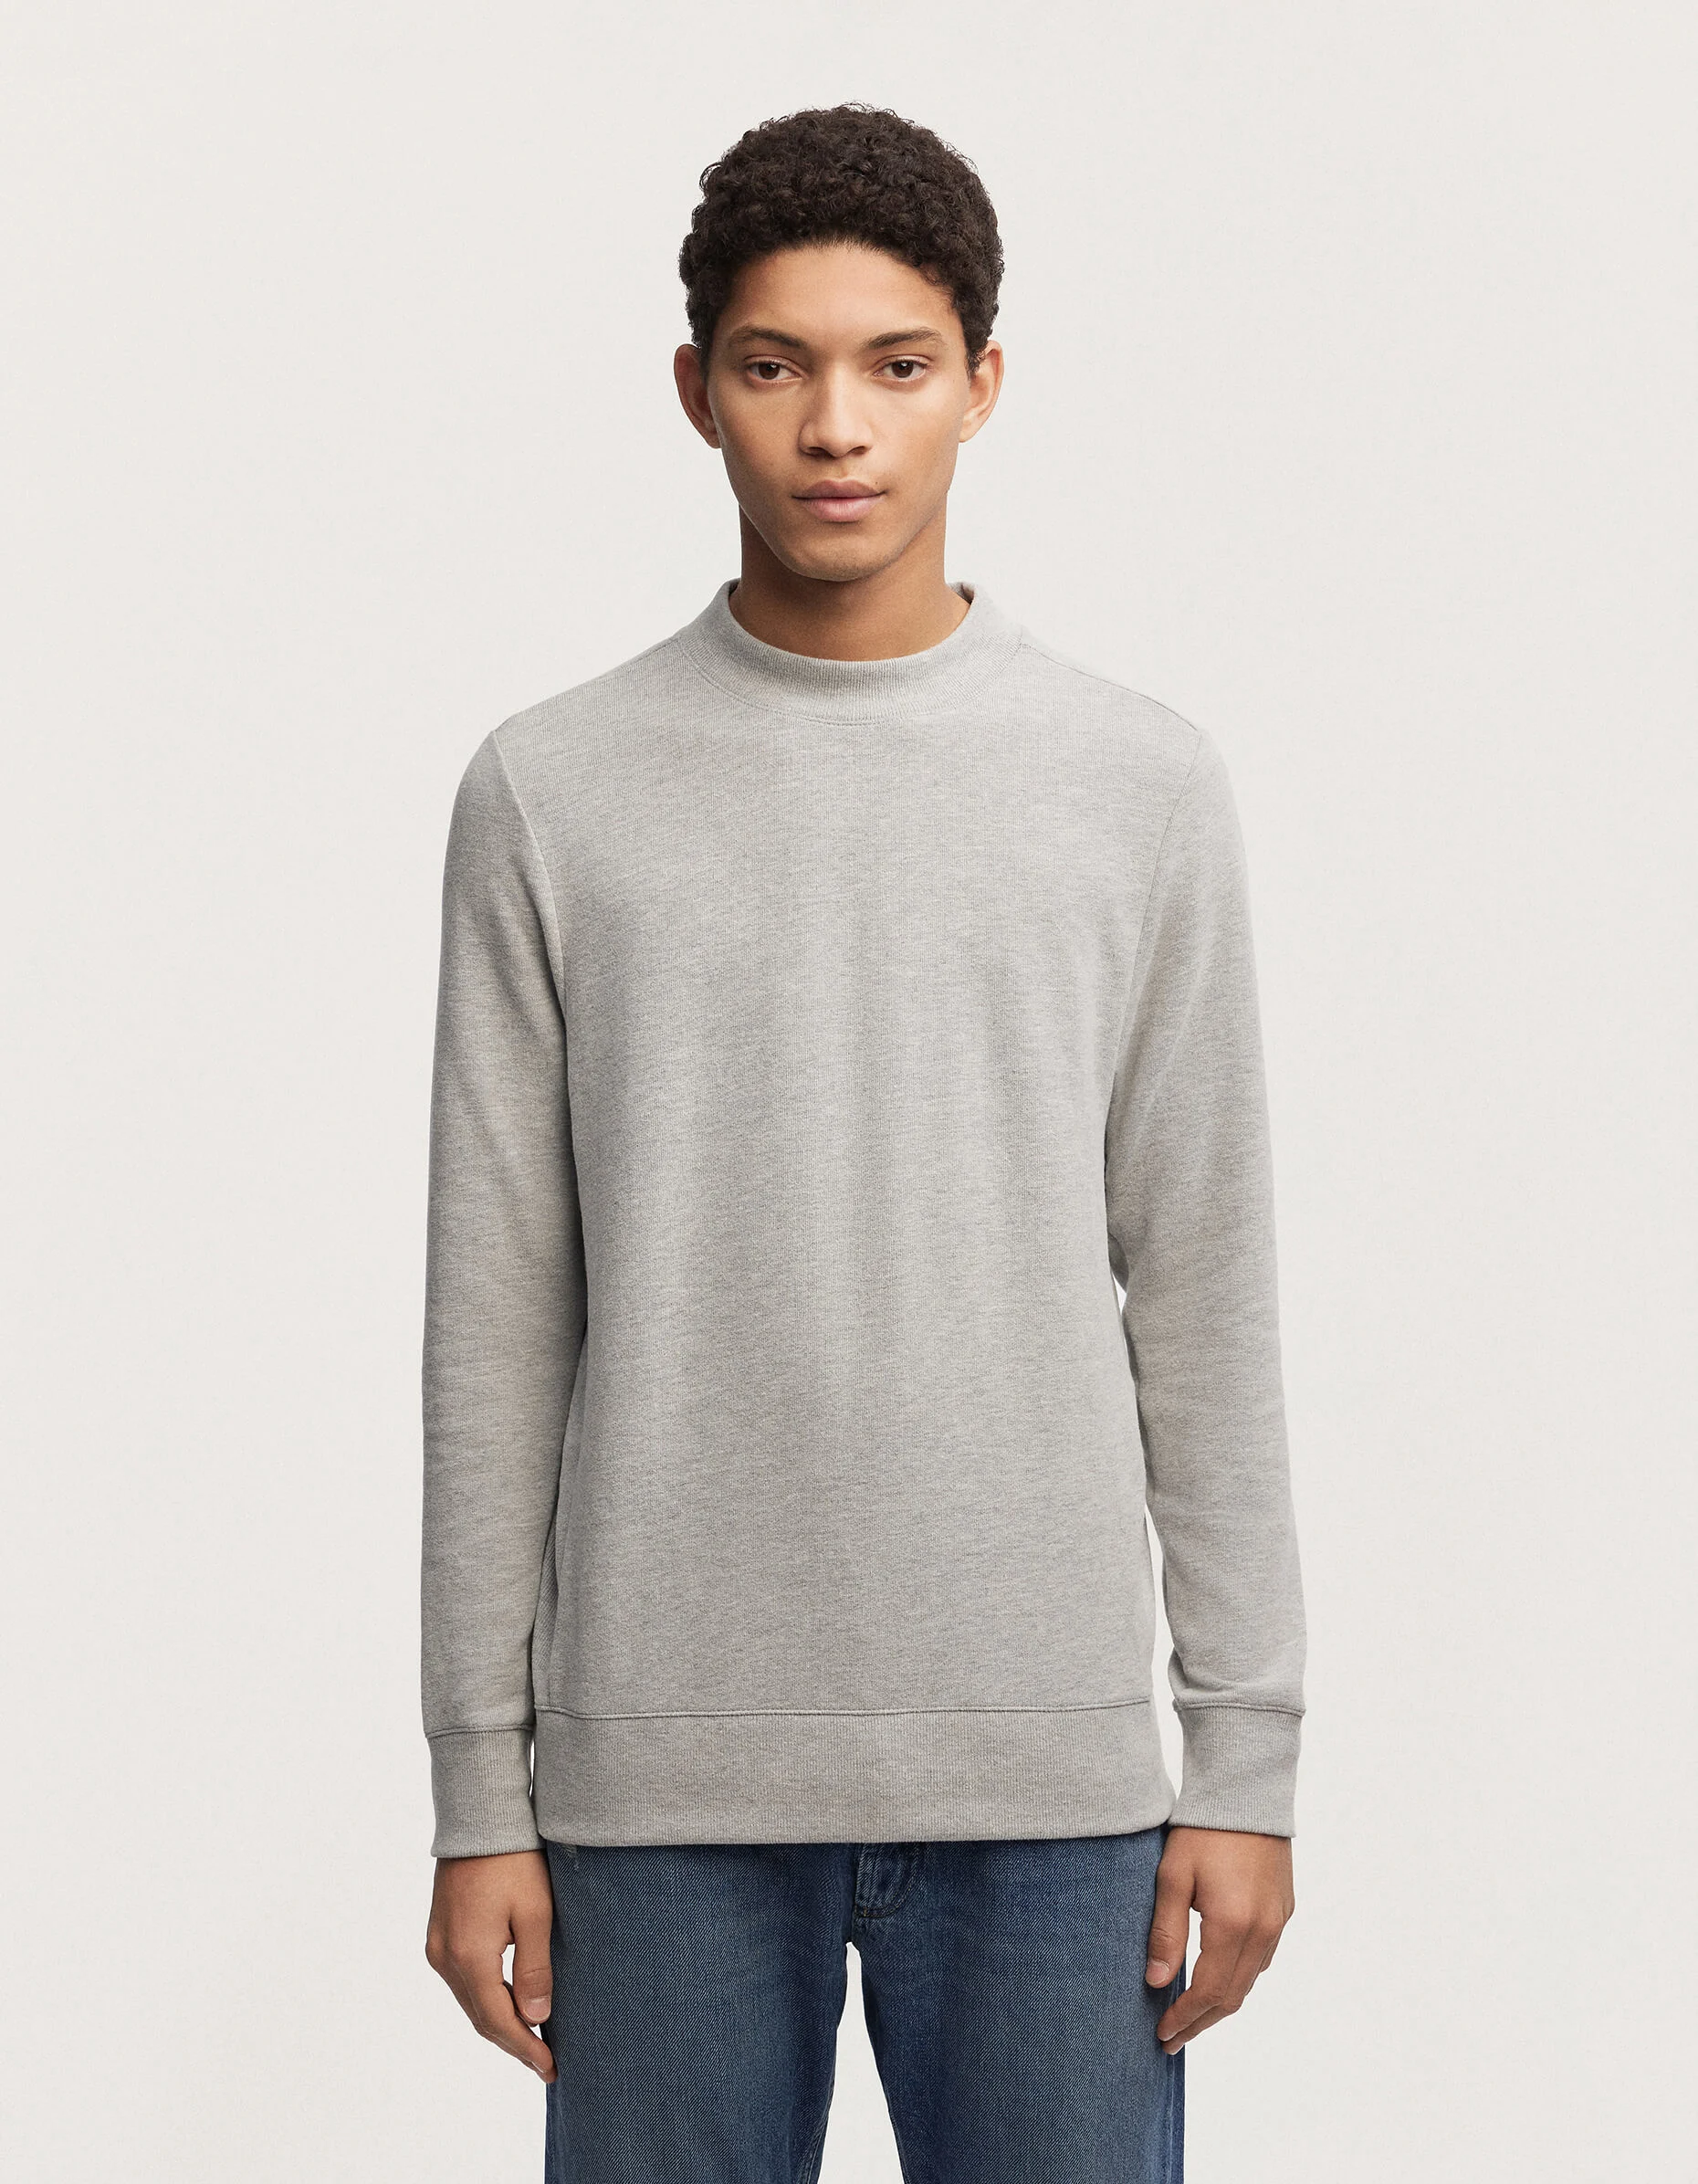 ROGER CREW NECK SWEATER Cotton Jersey